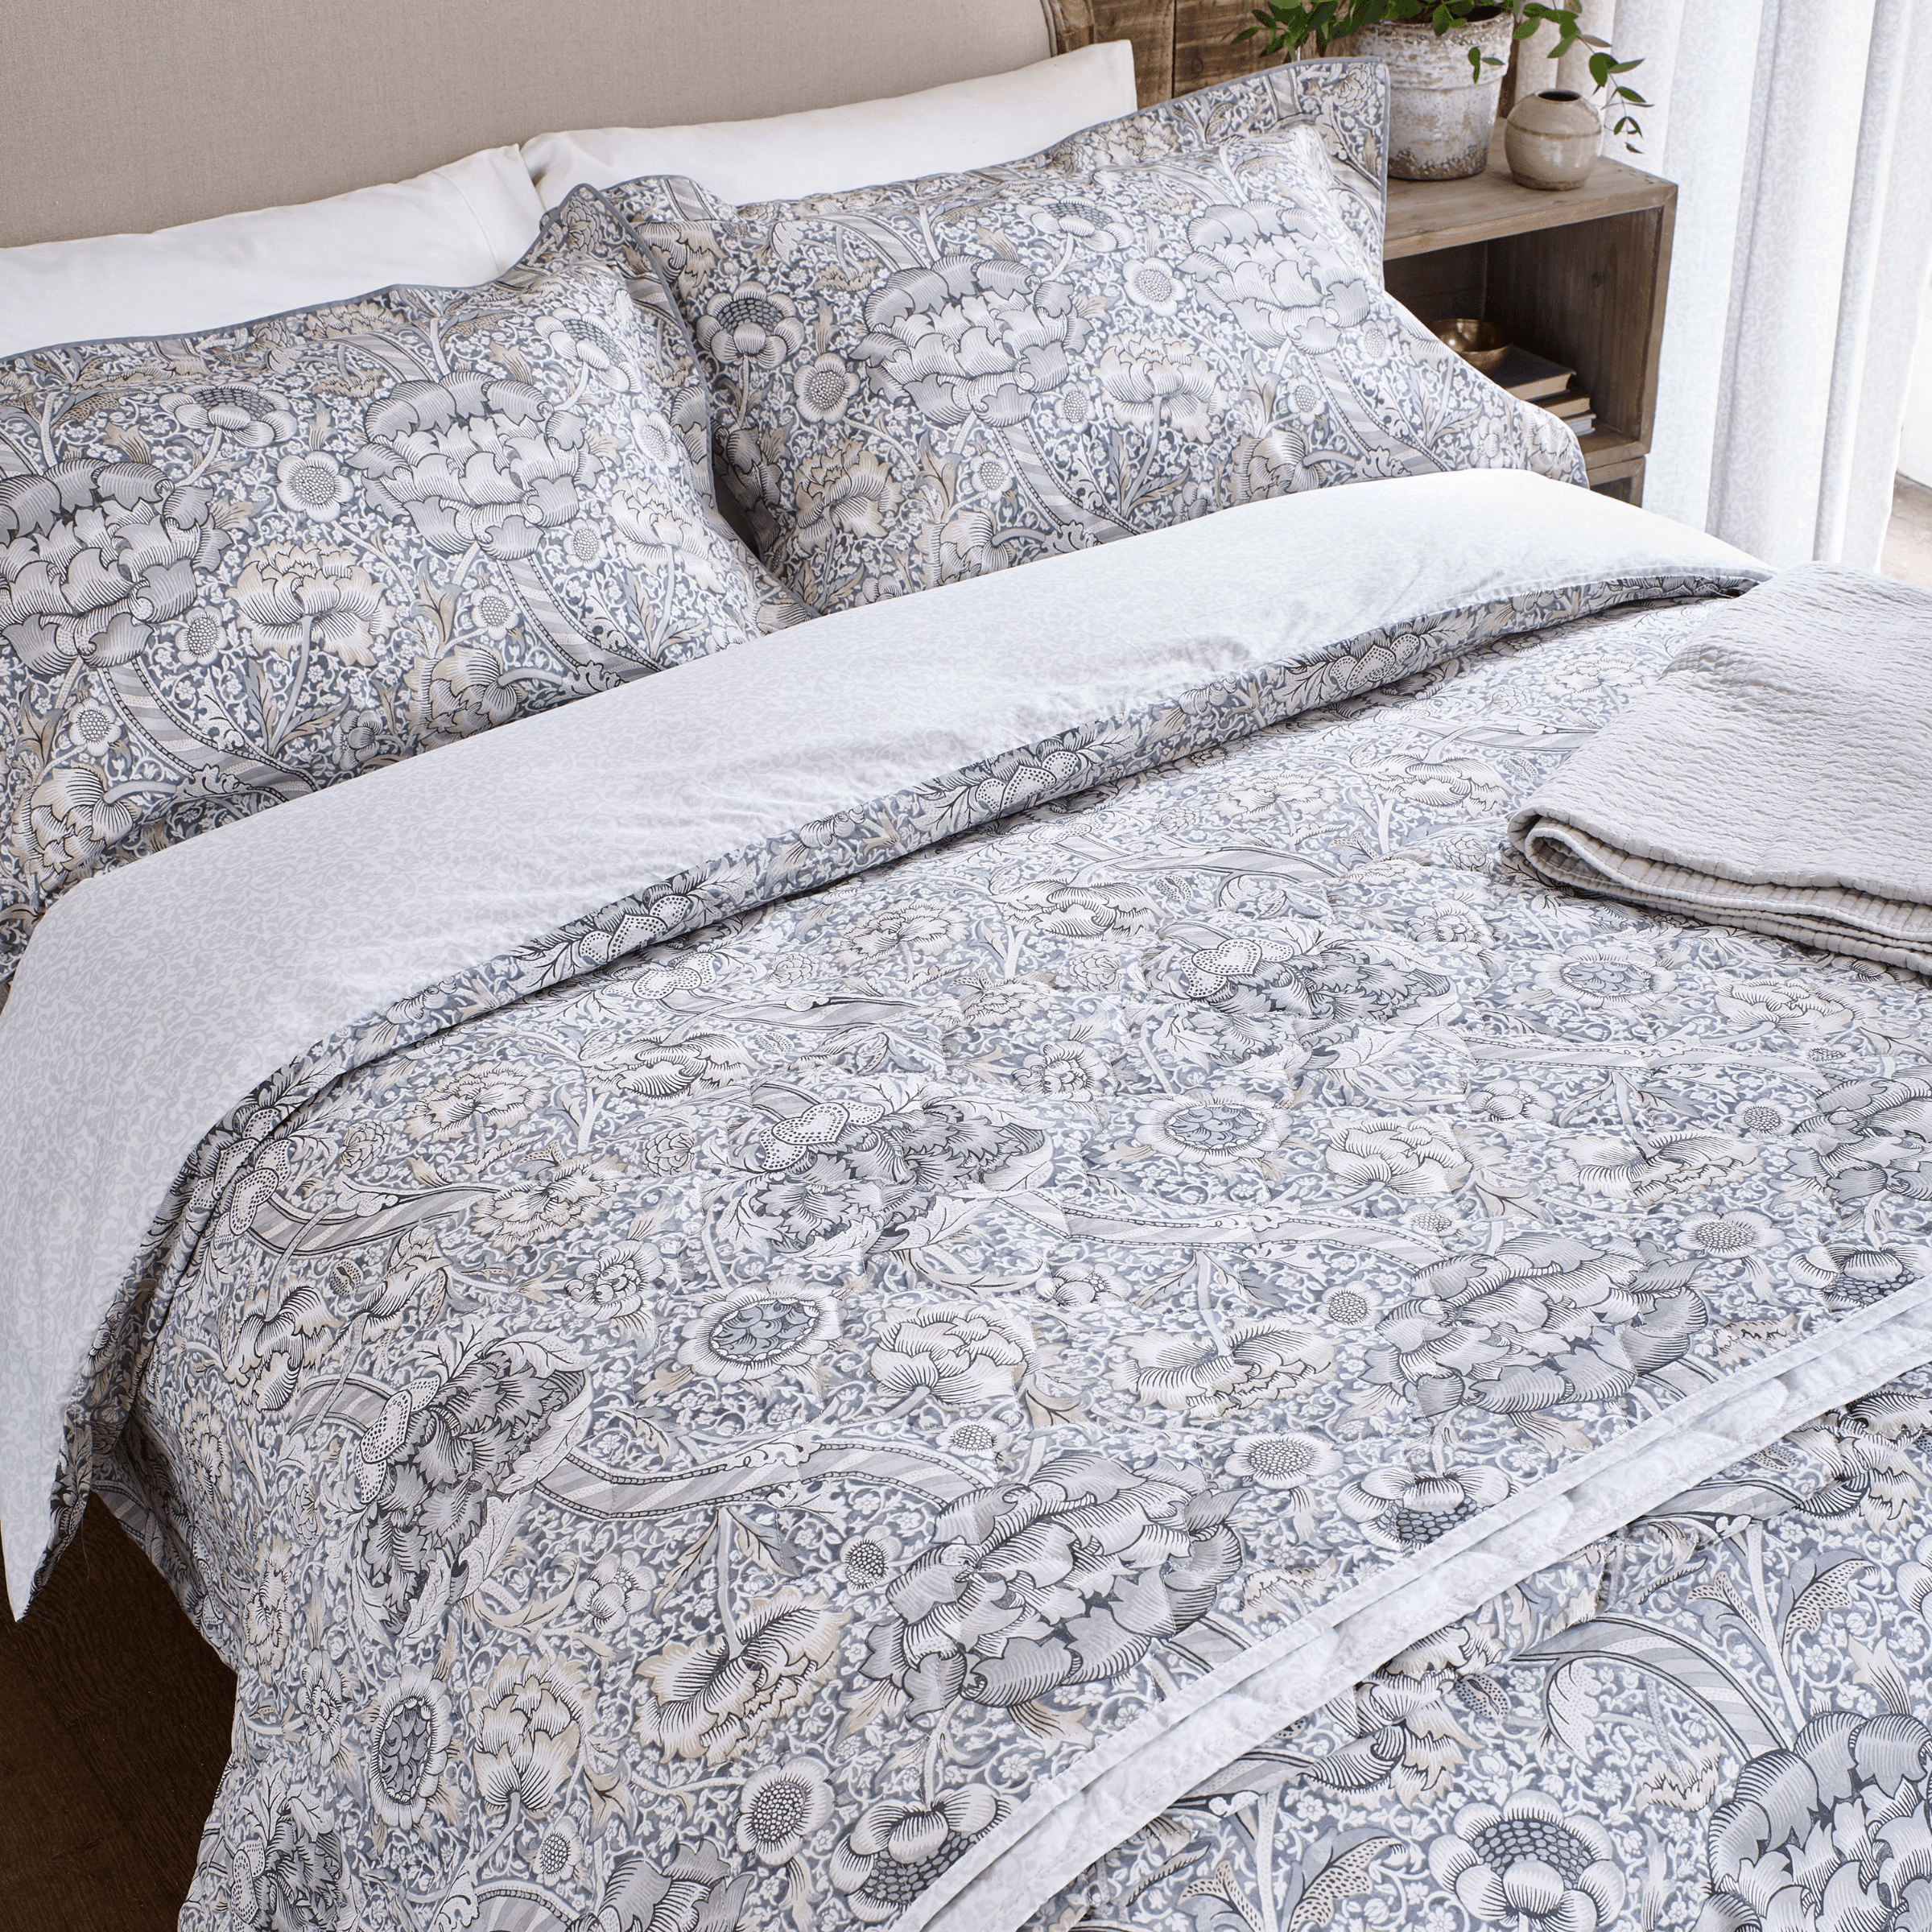 Wandle Duvet Cover In Grey Bedding By William Morris